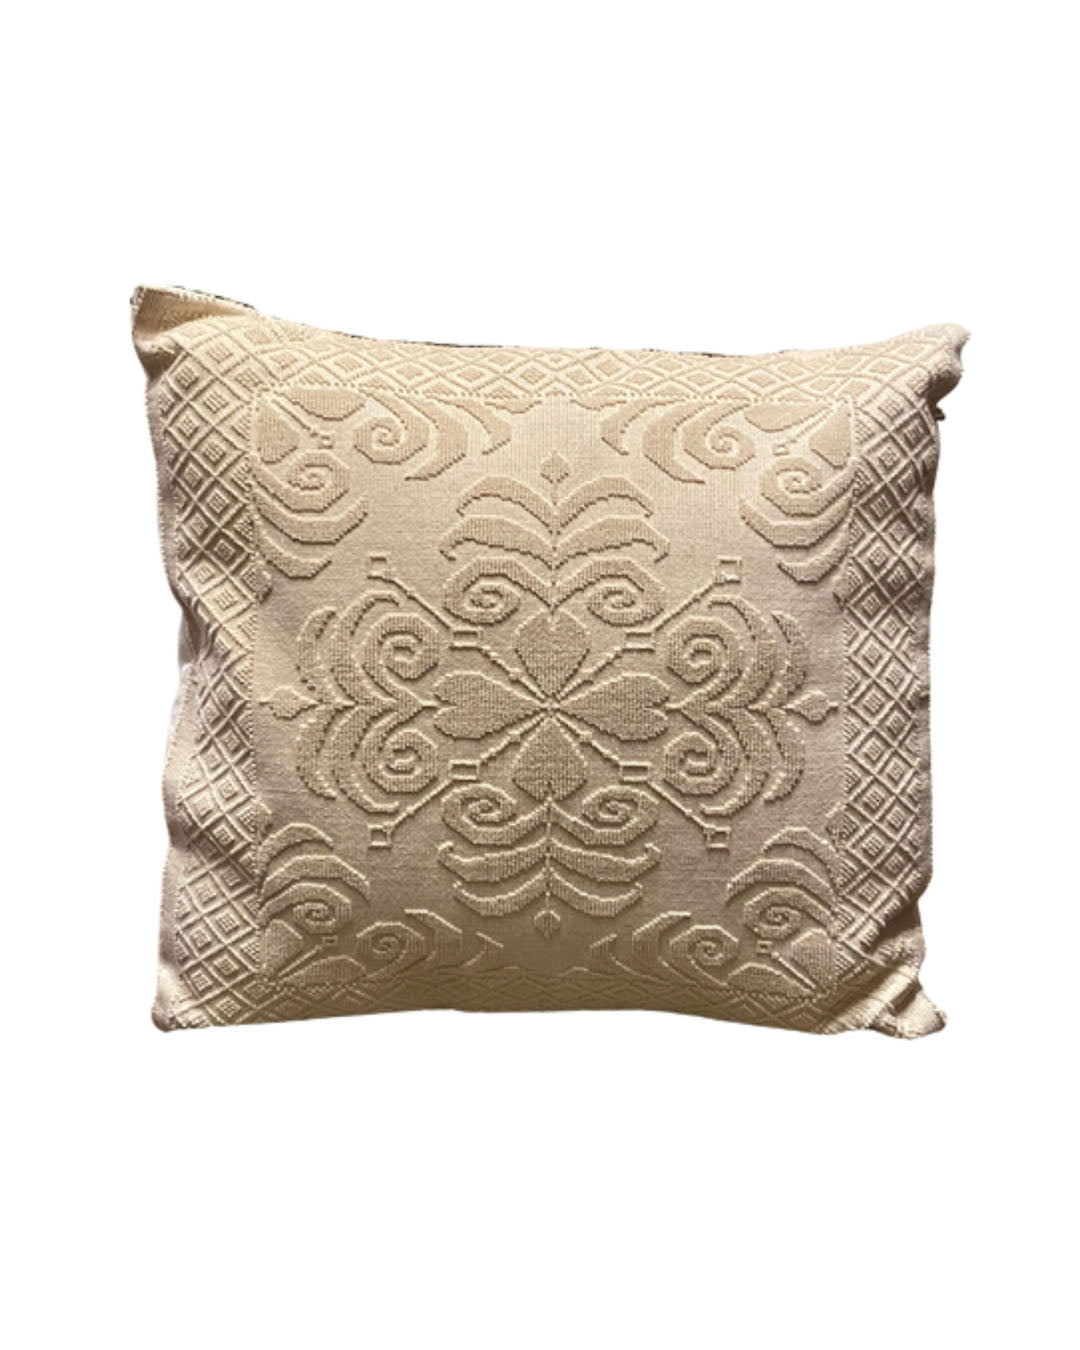 Cushion cover handmade handcrafted